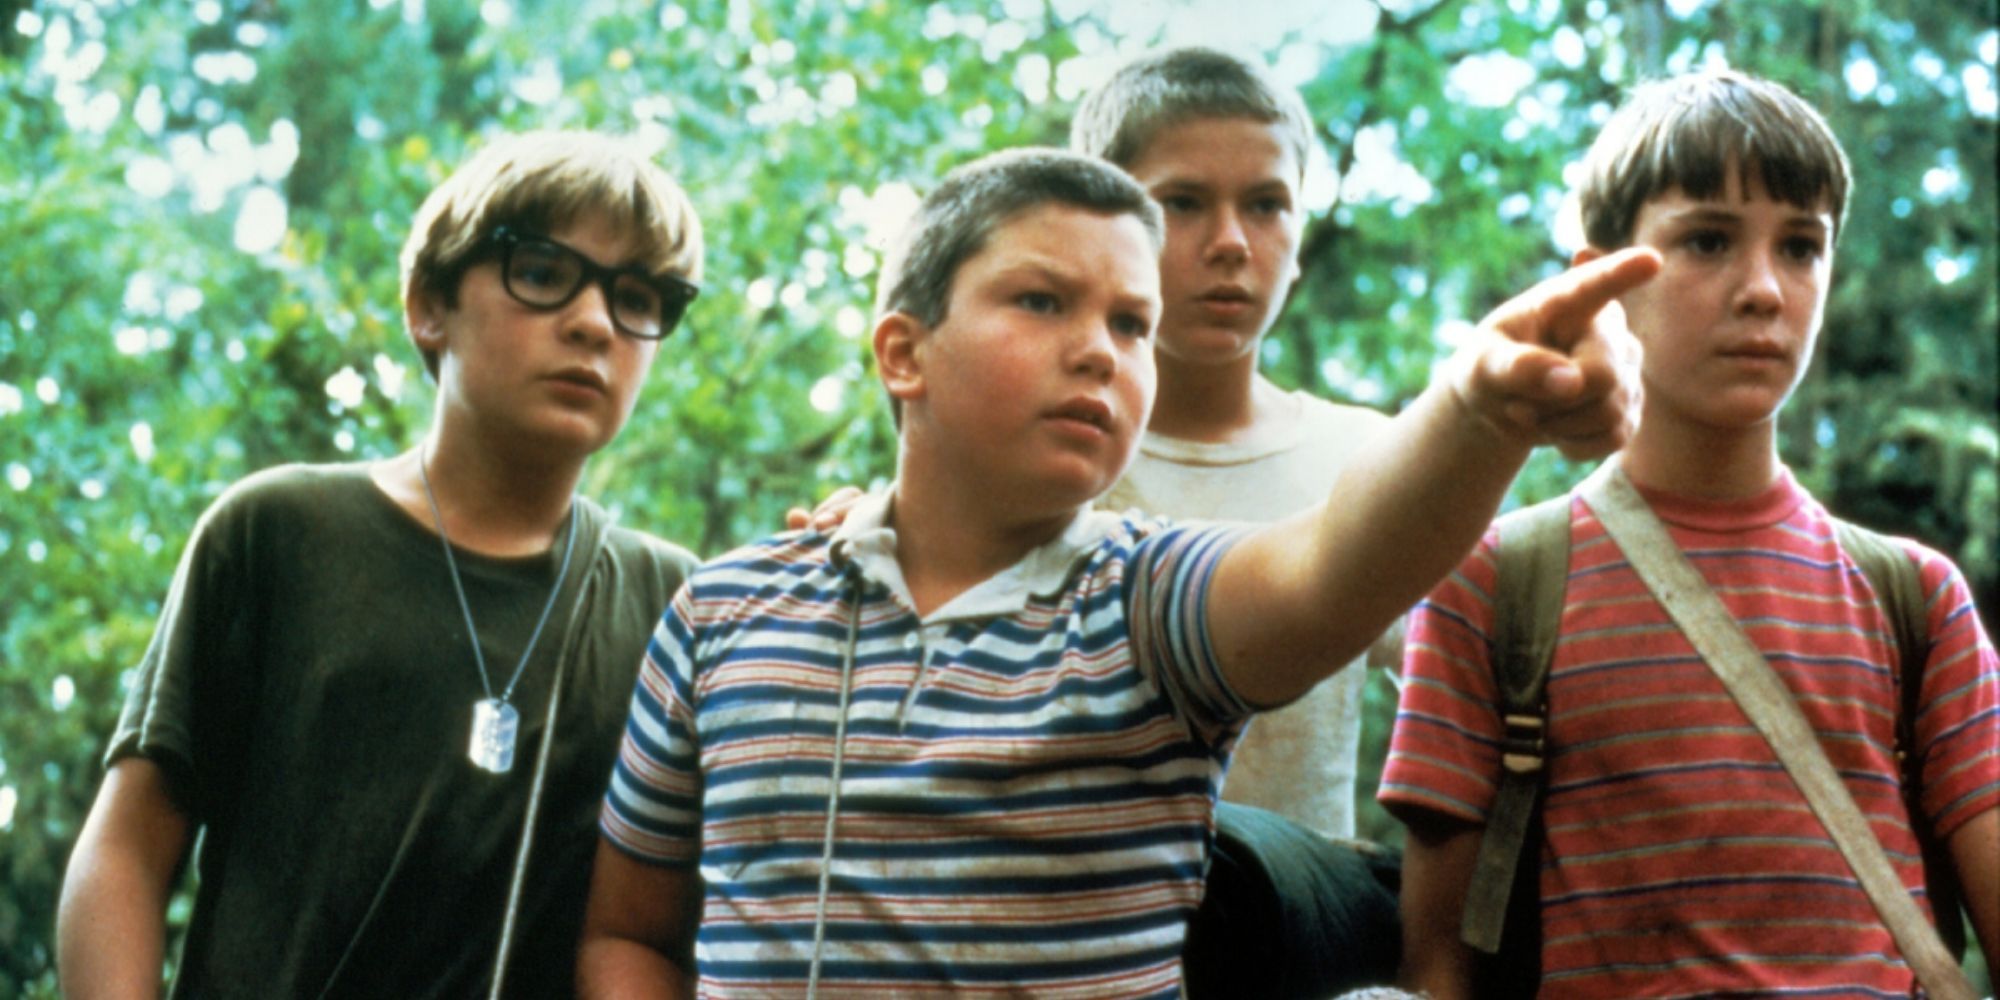 The four boys from Stand By Me